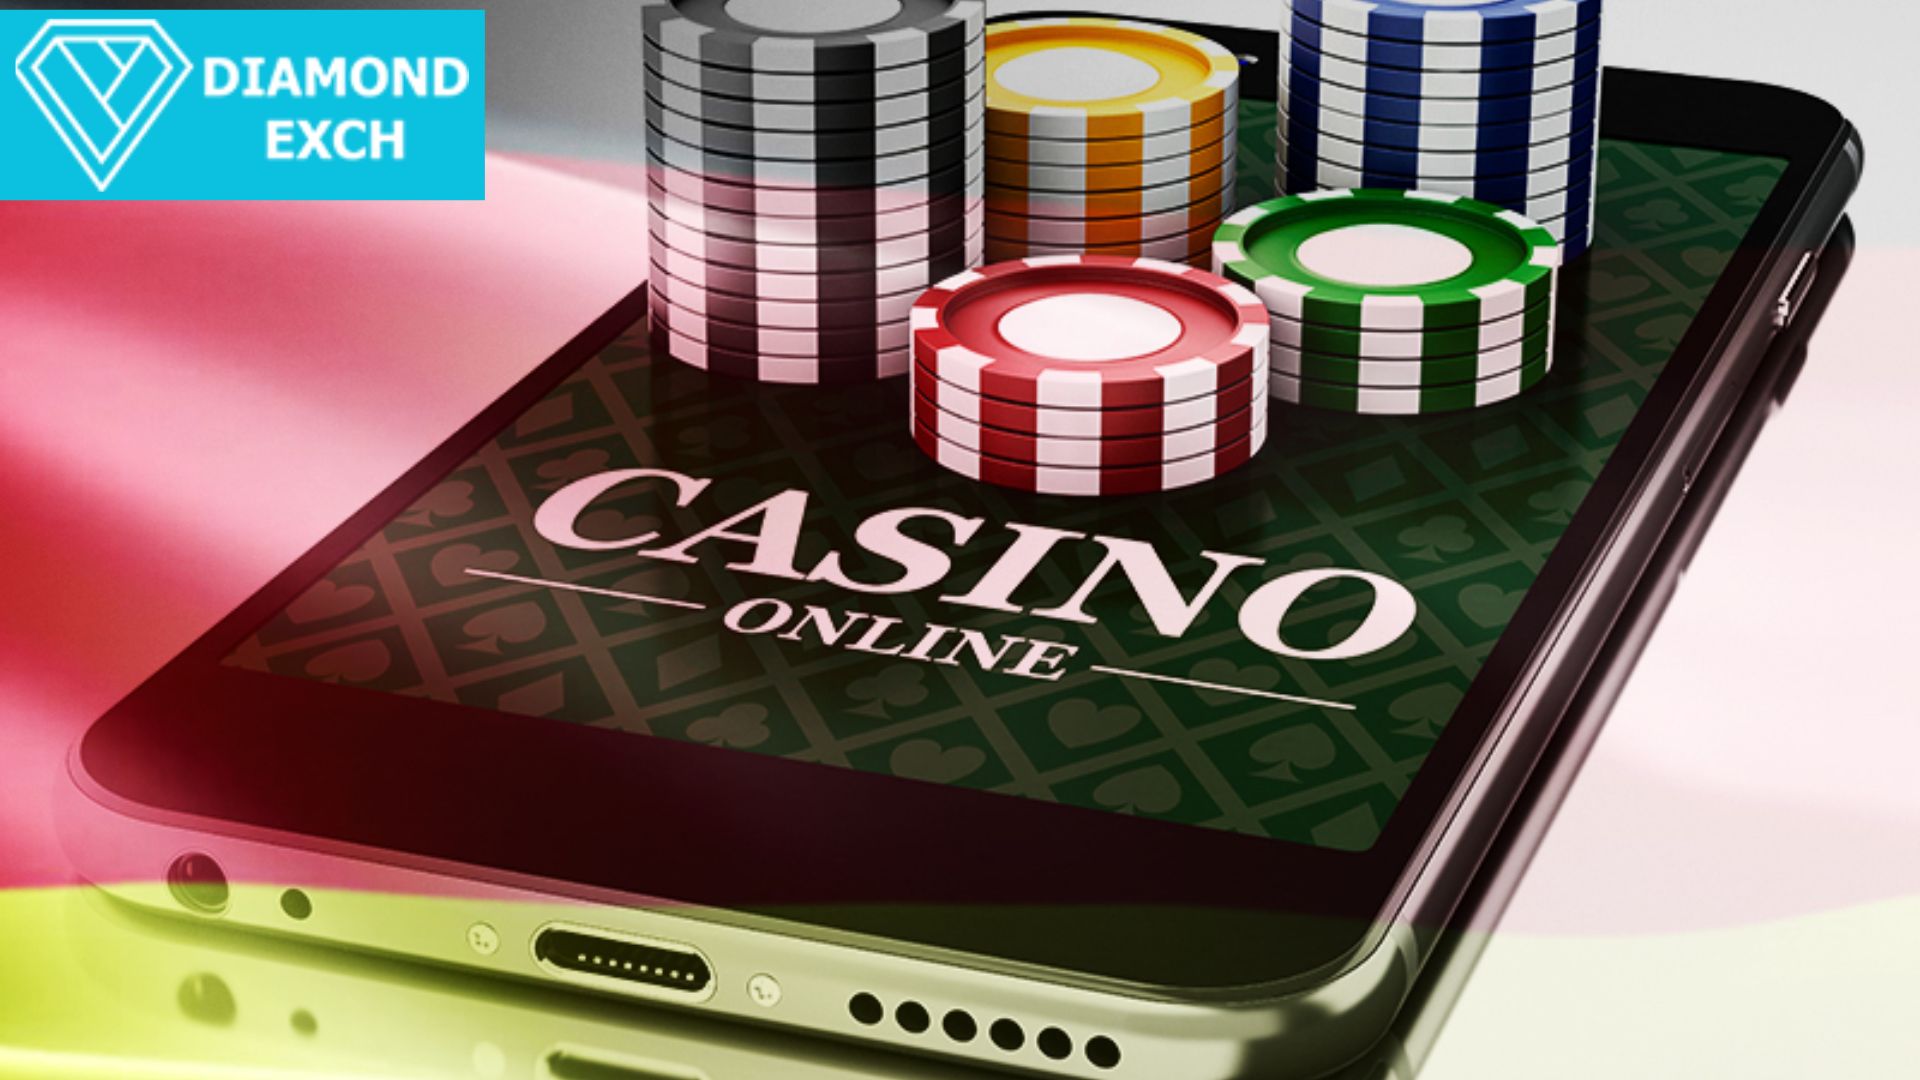 Get a Diamond Exch Betting ID to Play Online Casino Games